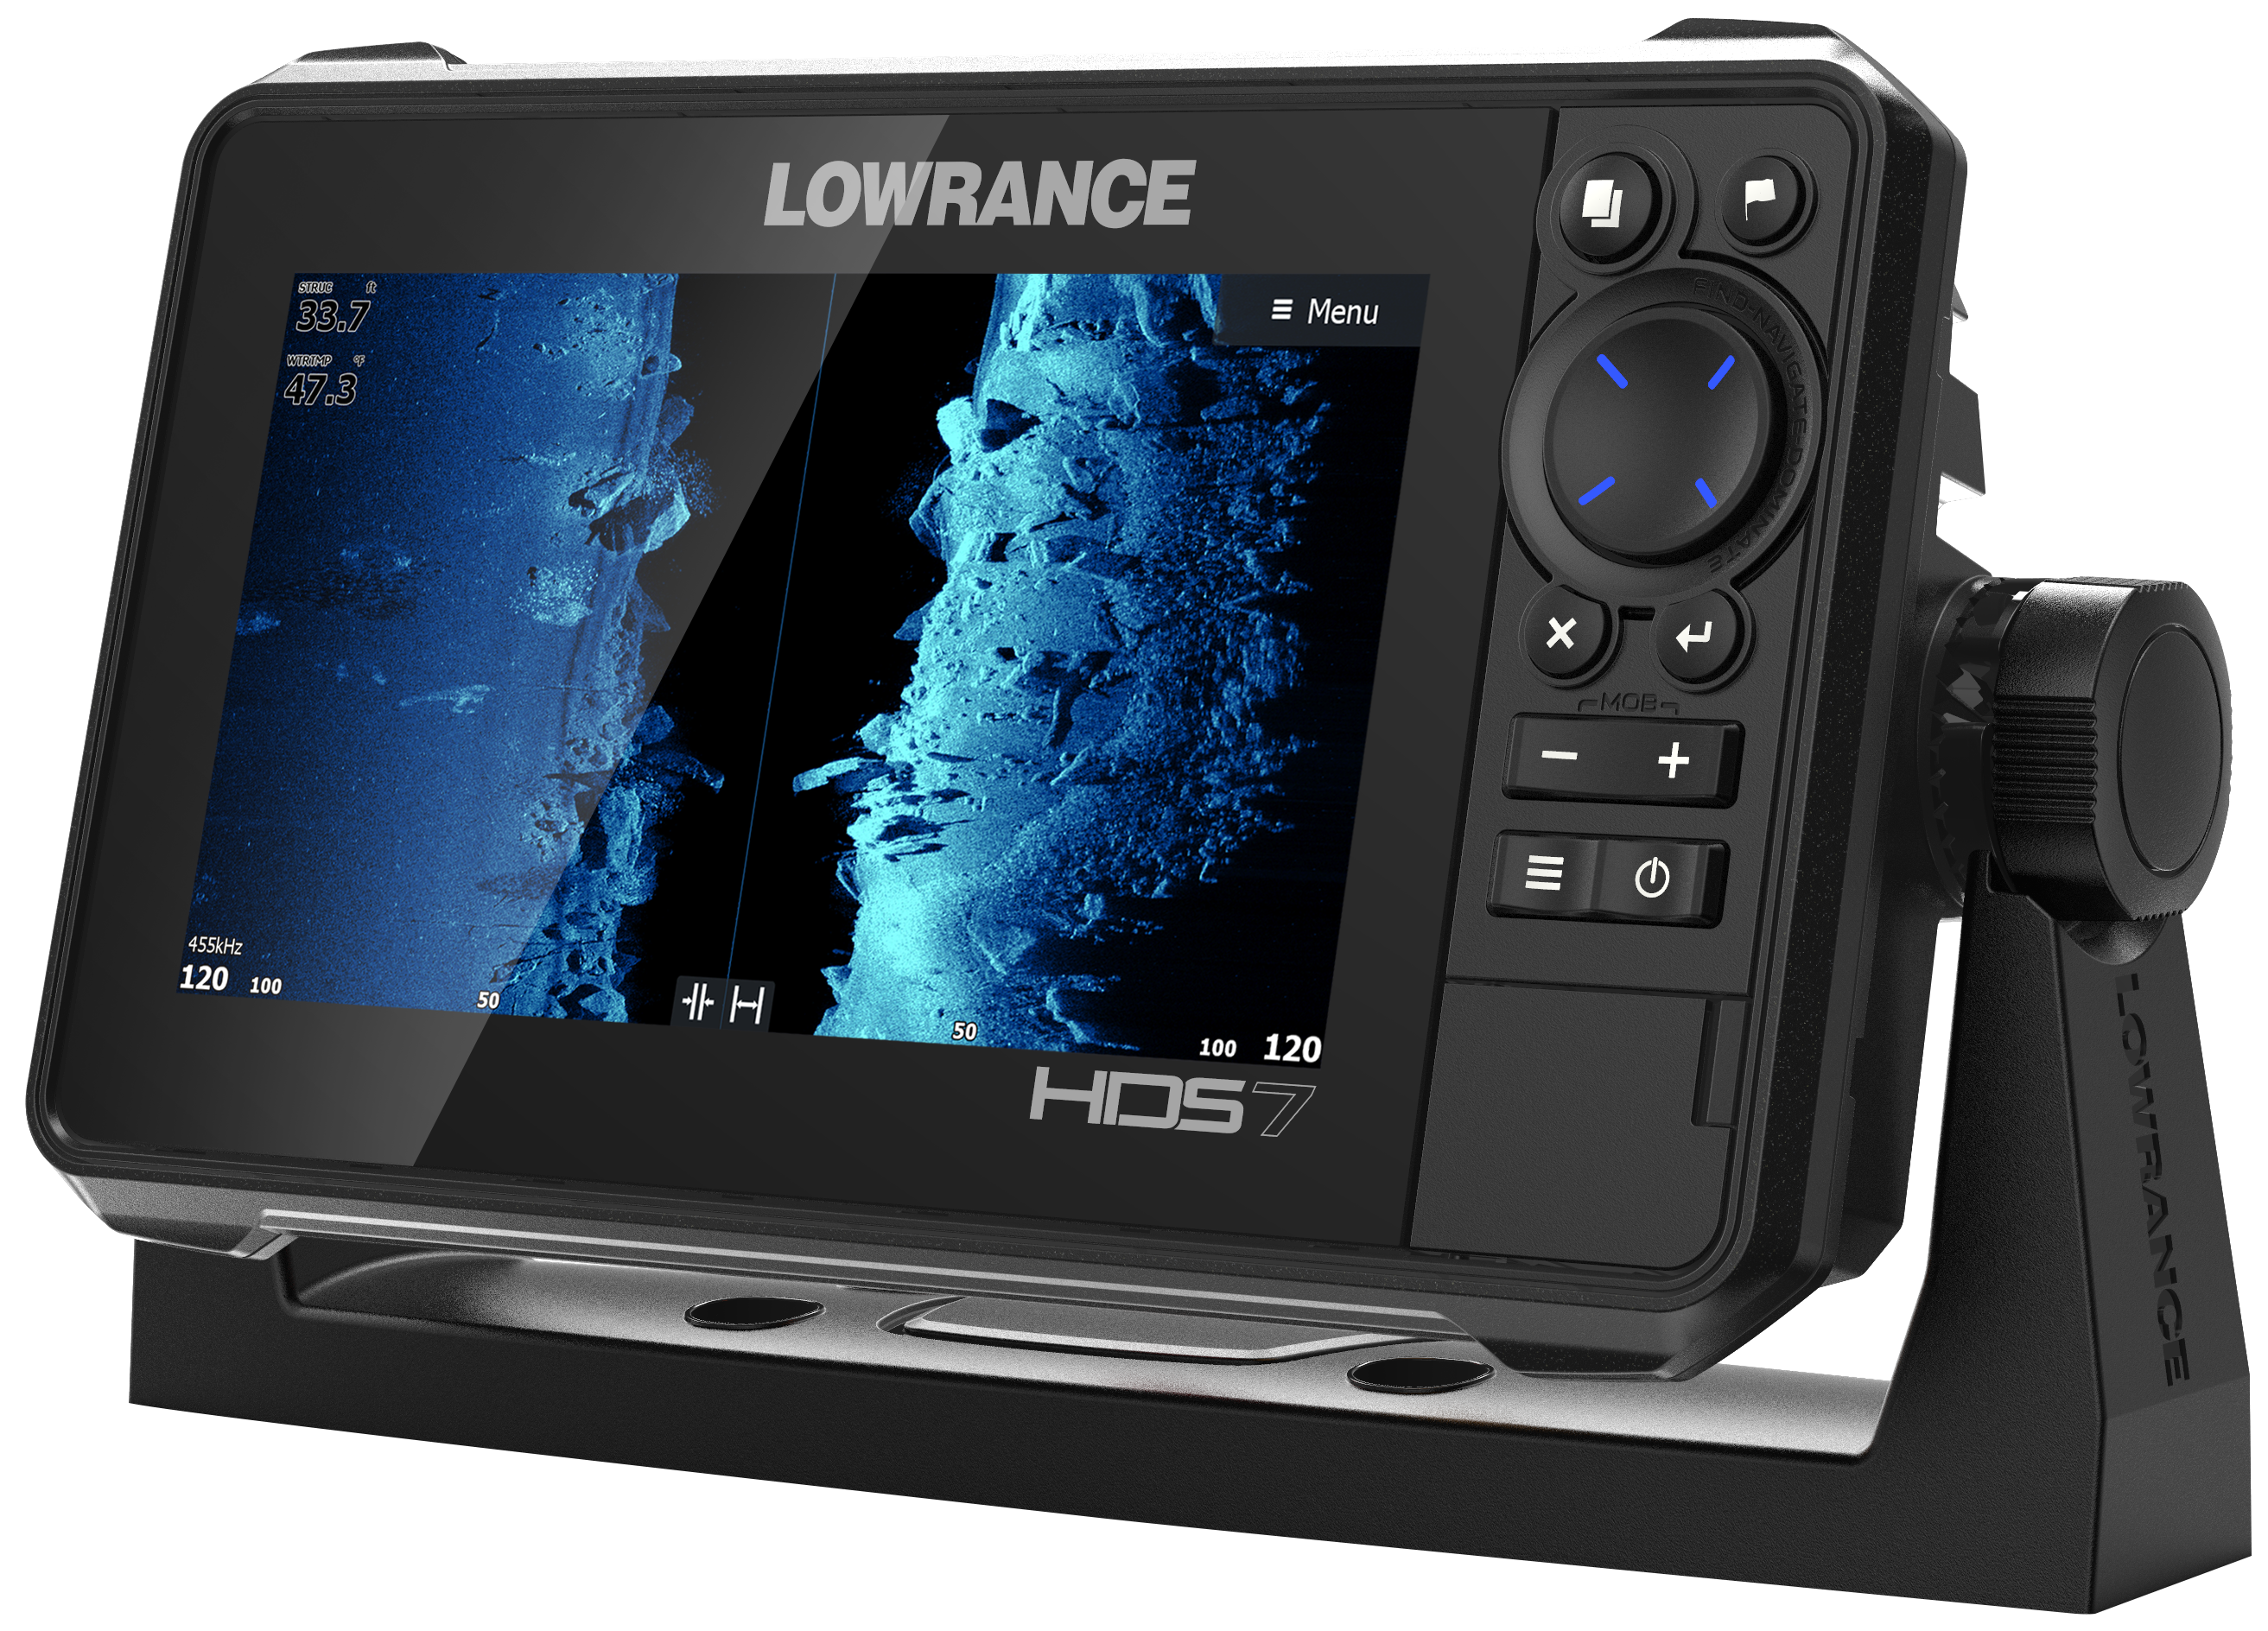 HDS-7 Live - 7-inch Fish Finder with Active Imaging 3 in 1 Transducer with Active Imaging Sonar FishReveal Fish Targeting and Smartphone Integration. Preloaded C-MAP US Enhanced Mapping - image 3 of 8